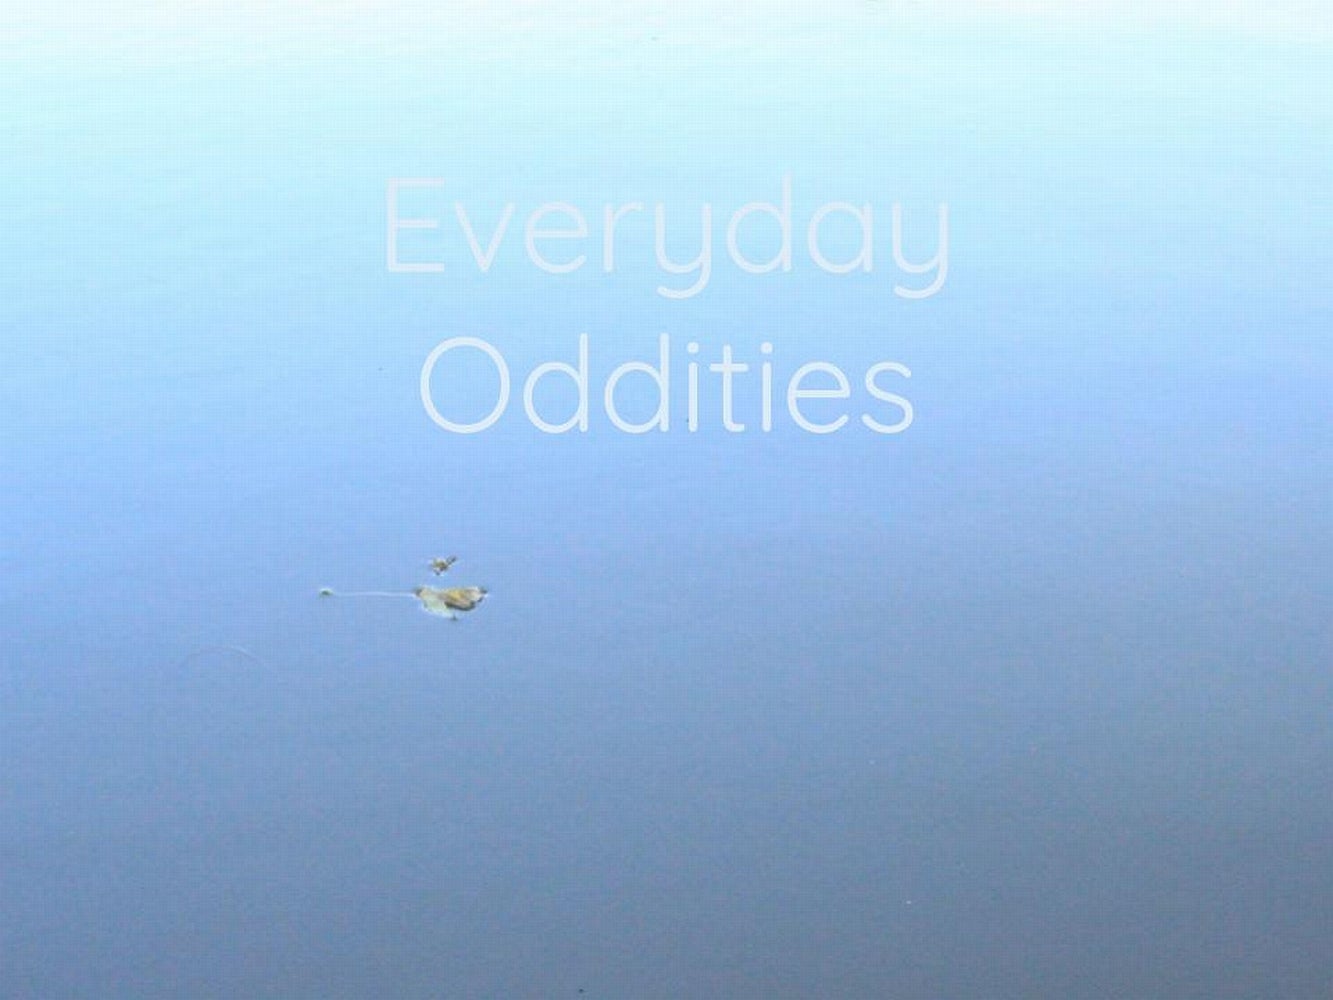 A leaf floats on calm water. Overlaid with text "Everyday Oddities"